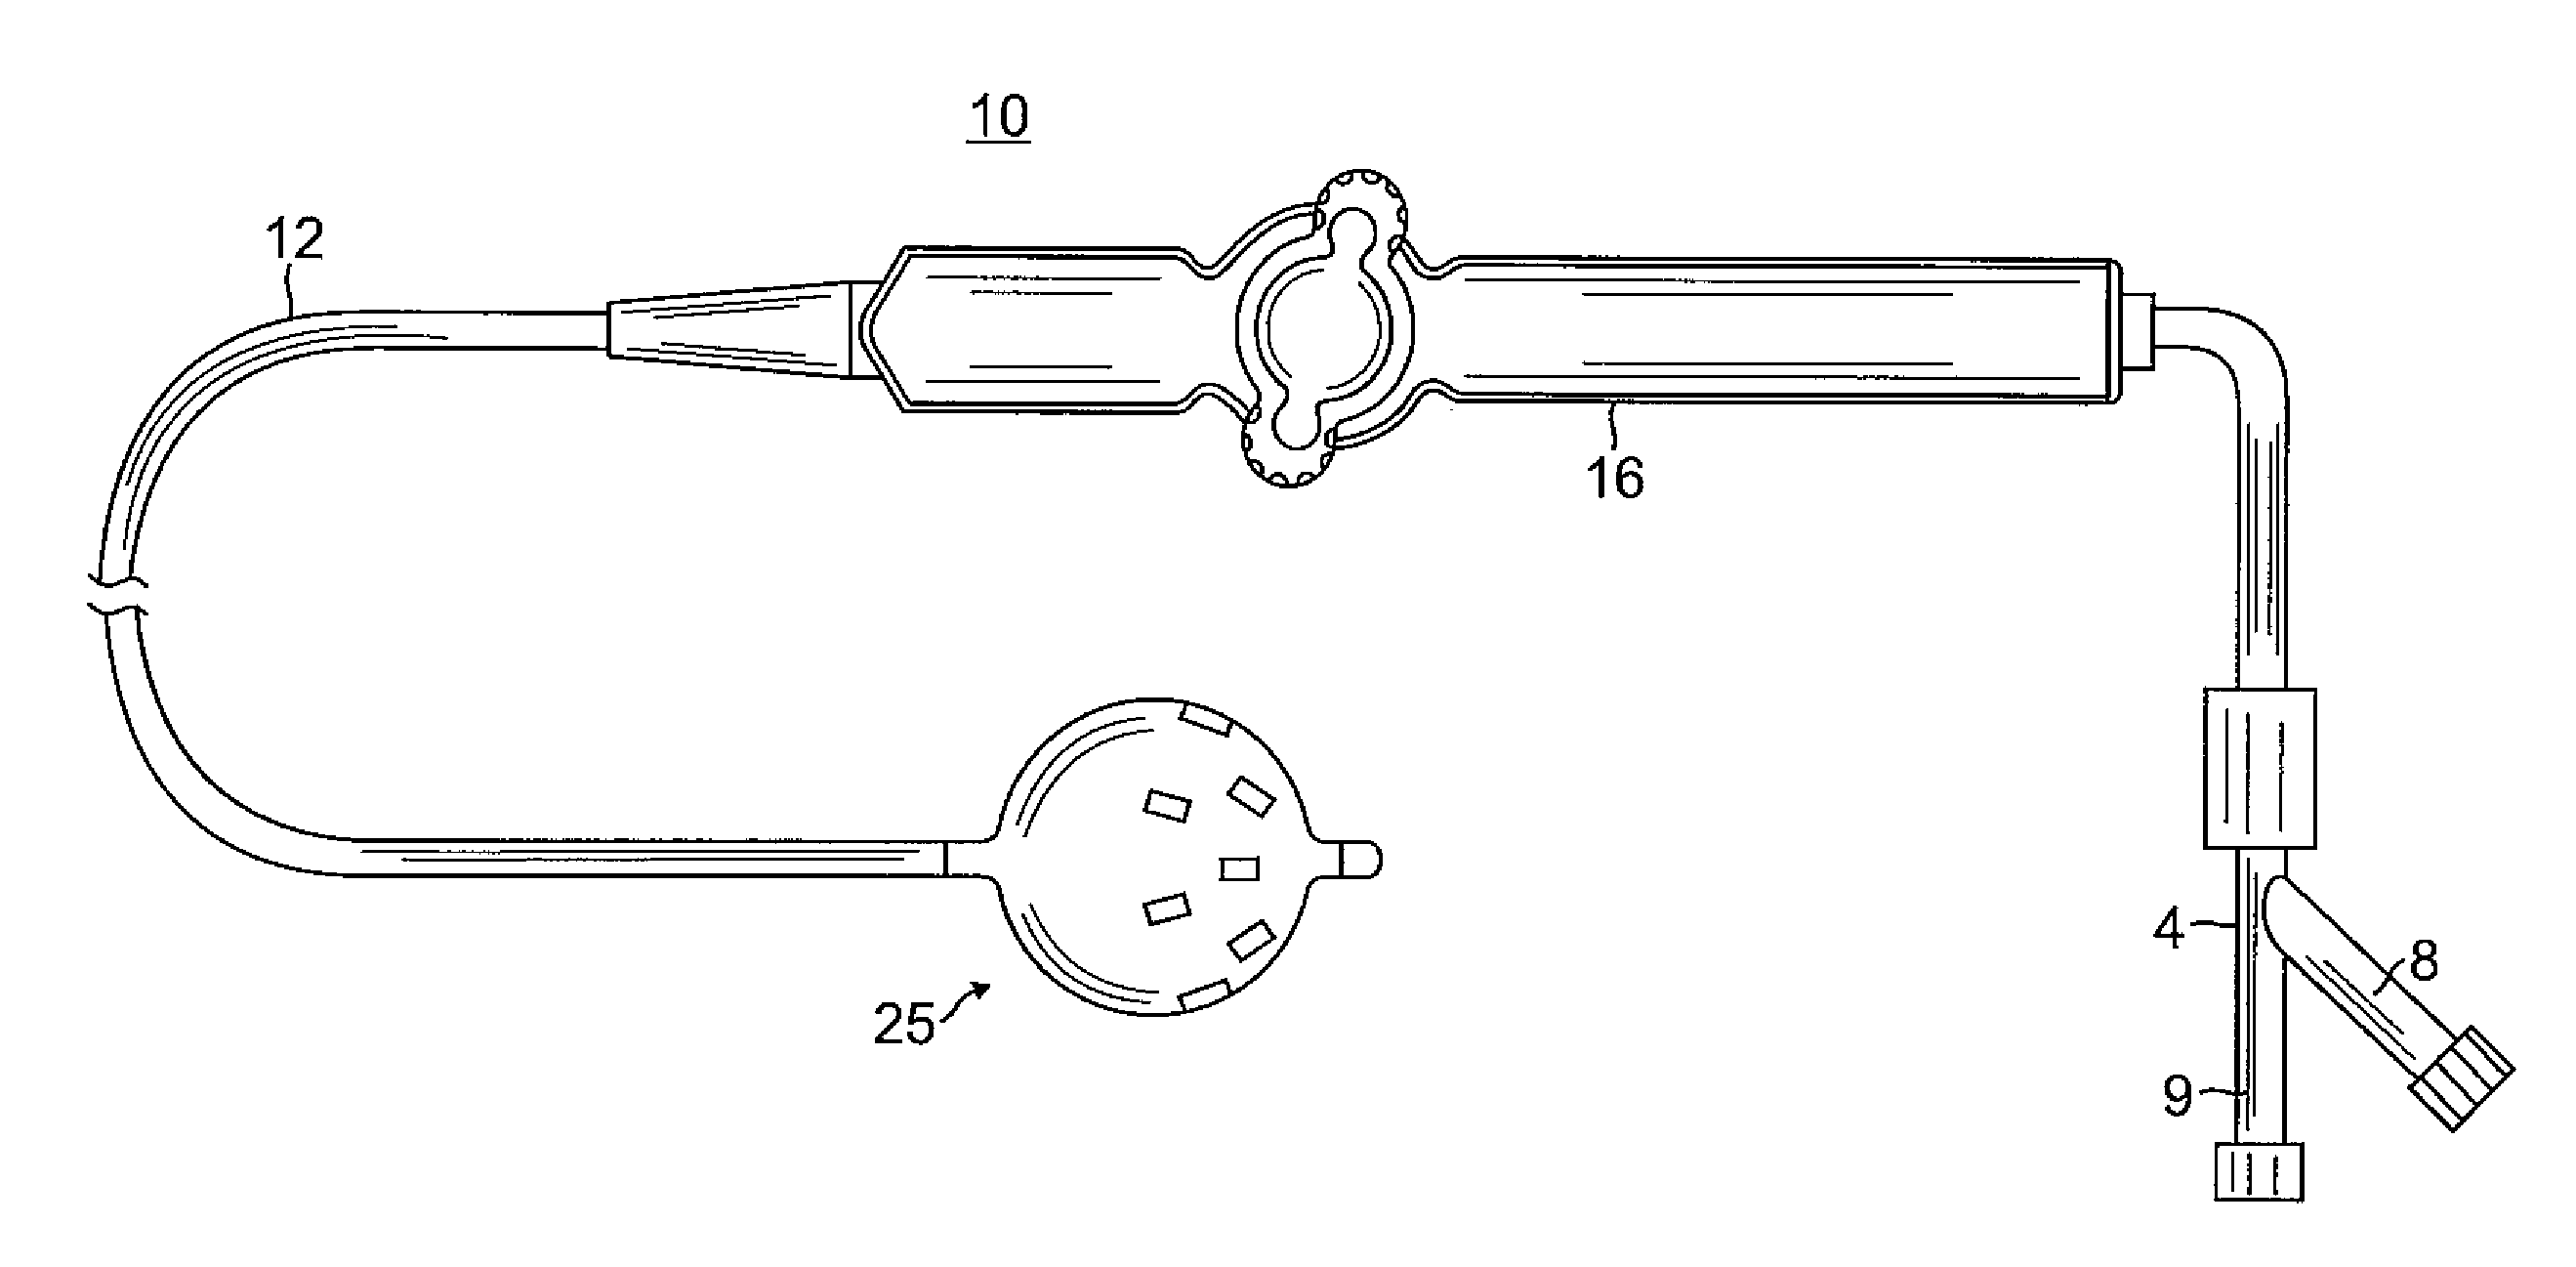 Multi-electrode balloon catheter with circumferential and point electrodes